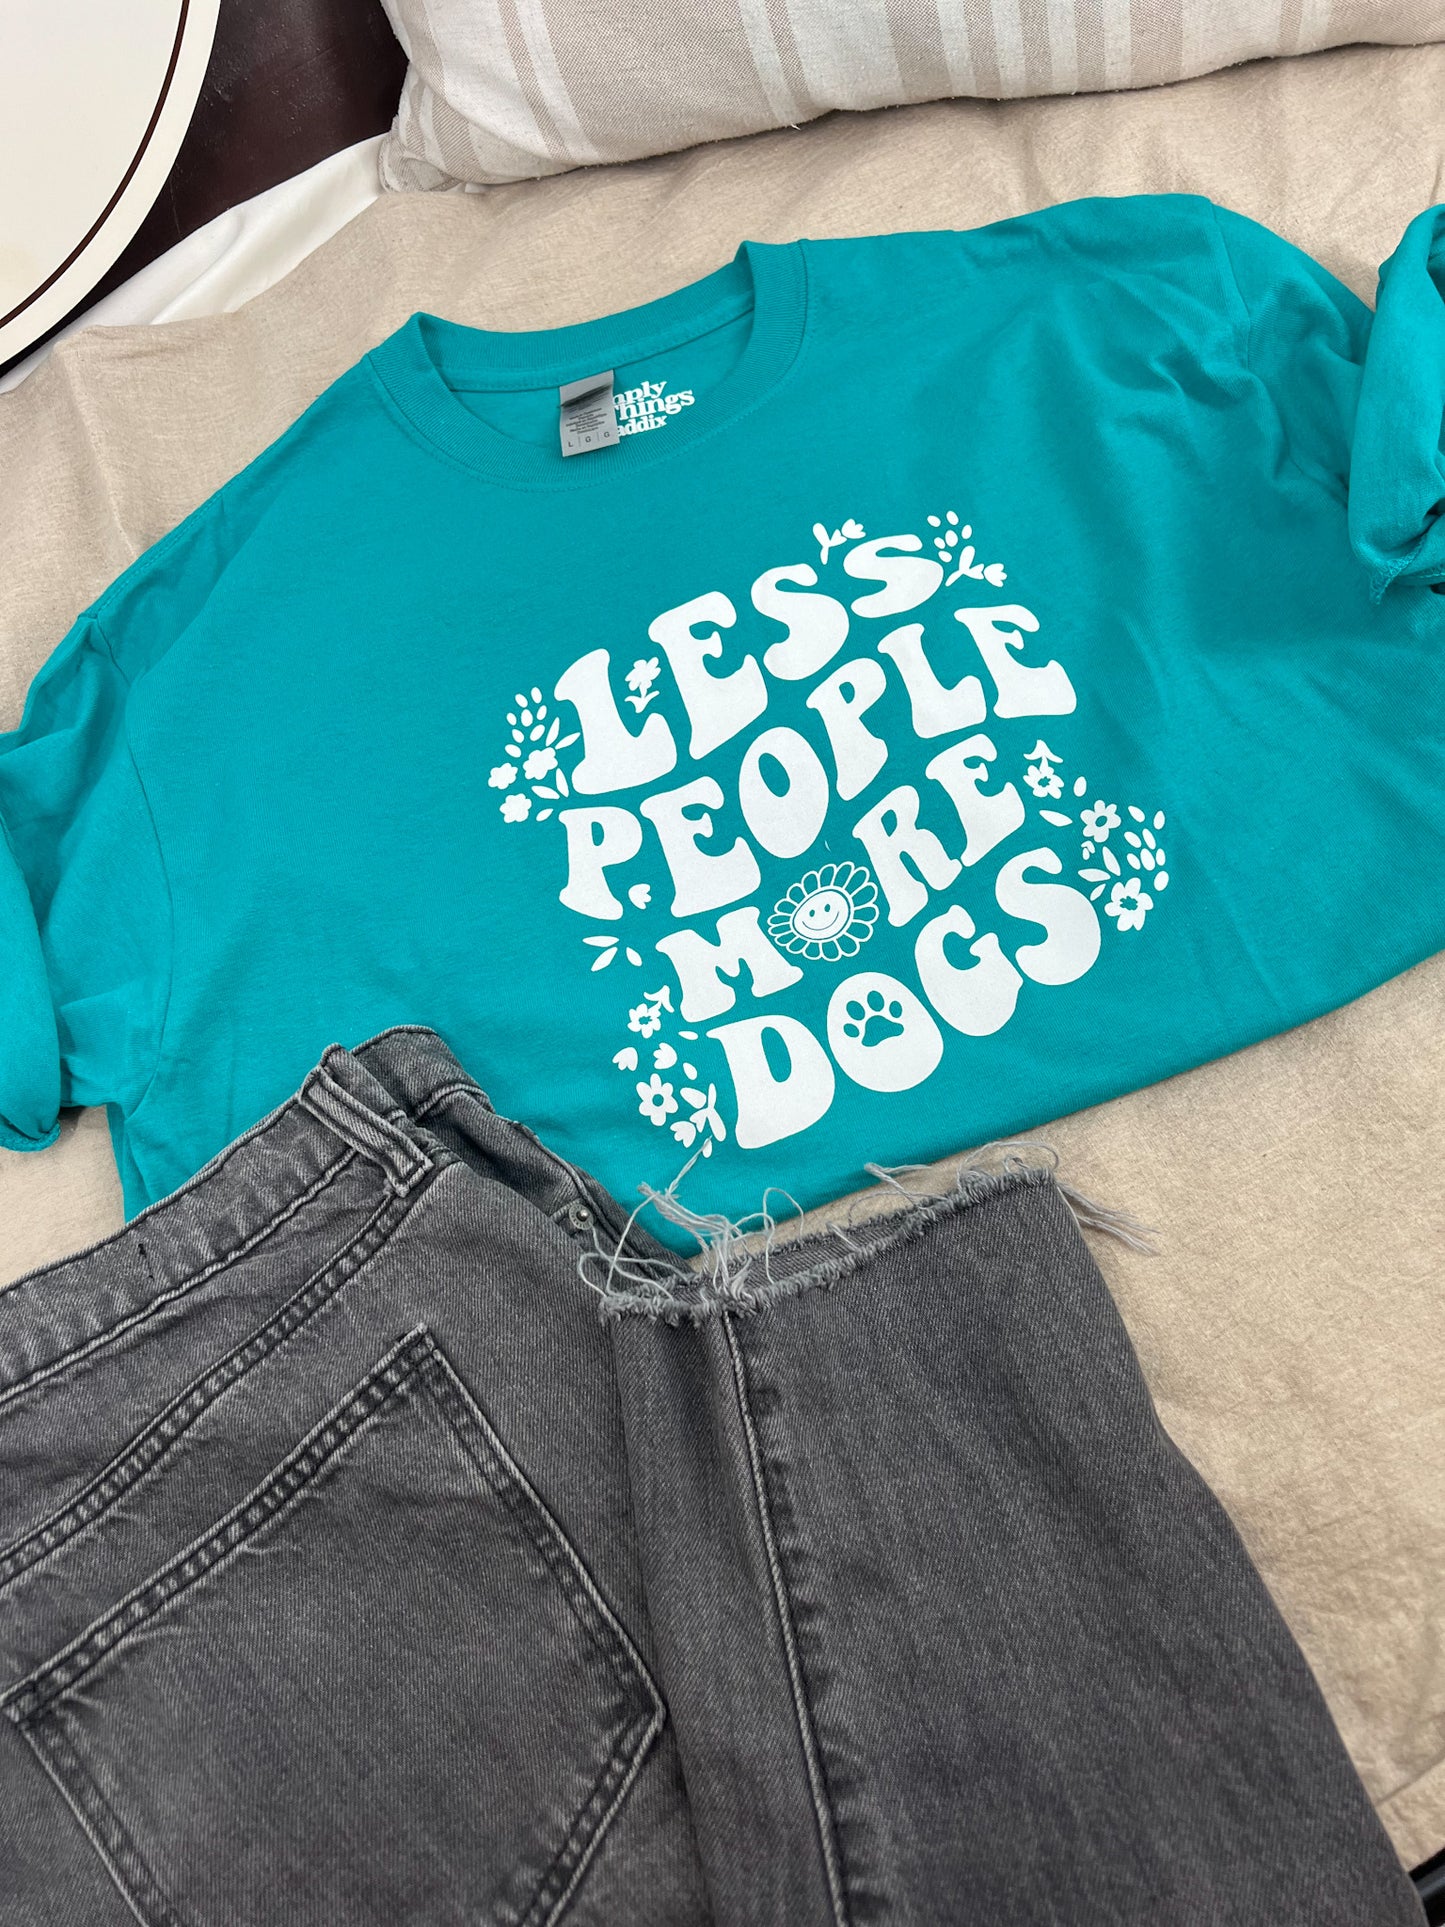 Less People More Dogs Short Sleeve Shirt